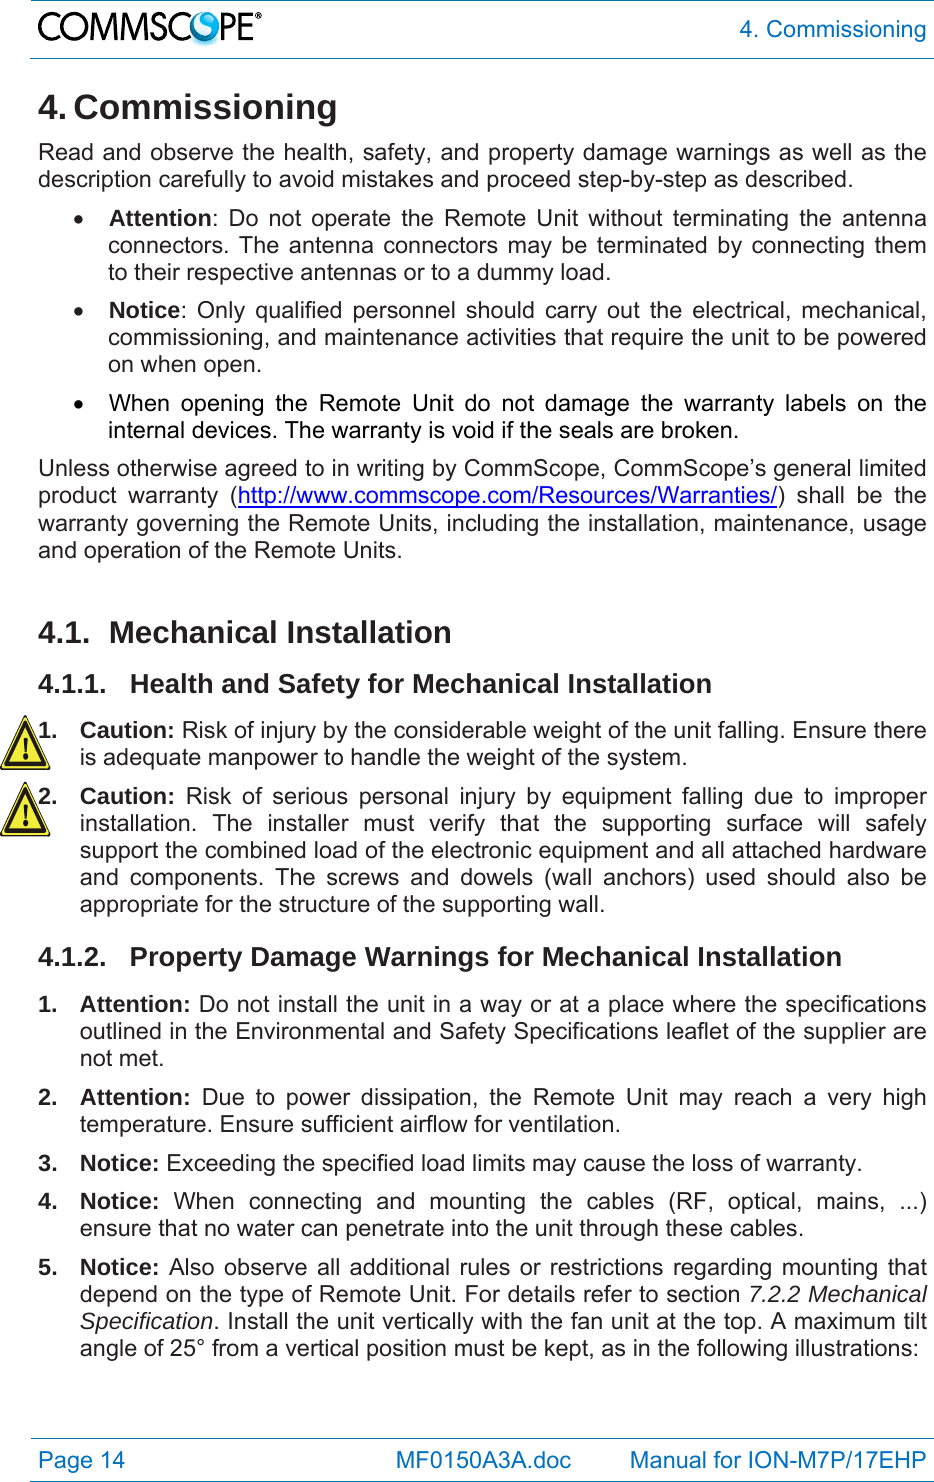  4. Commissioning Page 14            MF0150A3A.doc         Manual for ION-M7P/17EHP 4. Commissioning Read and observe the health, safety, and property damage warnings as well as the description carefully to avoid mistakes and proceed step-by-step as described.  Attention: Do not operate the Remote Unit without terminating the antenna connectors. The antenna connectors may be terminated by connecting them to their respective antennas or to a dummy load.  Notice: Only qualified personnel should carry out the electrical, mechanical, commissioning, and maintenance activities that require the unit to be powered on when open.    When opening the Remote Unit do not damage the warranty labels on the internal devices. The warranty is void if the seals are broken. Unless otherwise agreed to in writing by CommScope, CommScope’s general limited product warranty (http://www.commscope.com/Resources/Warranties/) shall be the warranty governing the Remote Units, including the installation, maintenance, usage and operation of the Remote Units.  4.1. Mechanical Installation 4.1.1. Health and Safety for Mechanical Installation 1. Caution: Risk of injury by the considerable weight of the unit falling. Ensure there is adequate manpower to handle the weight of the system. 2. Caution: Risk of serious personal injury by equipment falling due to improper installation. The installer must verify that the supporting surface will safely support the combined load of the electronic equipment and all attached hardware and components. The screws and dowels (wall anchors) used should also be appropriate for the structure of the supporting wall. 4.1.2.  Property Damage Warnings for Mechanical Installation 1. Attention: Do not install the unit in a way or at a place where the specifications outlined in the Environmental and Safety Specifications leaflet of the supplier are not met. 2. Attention: Due to power dissipation, the Remote Unit may reach a very high temperature. Ensure sufficient airflow for ventilation. 3. Notice: Exceeding the specified load limits may cause the loss of warranty. 4. Notice: When connecting and mounting the cables (RF, optical, mains, ...) ensure that no water can penetrate into the unit through these cables. 5. Notice: Also observe all additional rules or restrictions regarding mounting that depend on the type of Remote Unit. For details refer to section 7.2.2 Mechanical Specification. Install the unit vertically with the fan unit at the top. A maximum tilt angle of 25° from a vertical position must be kept, as in the following illustrations: 